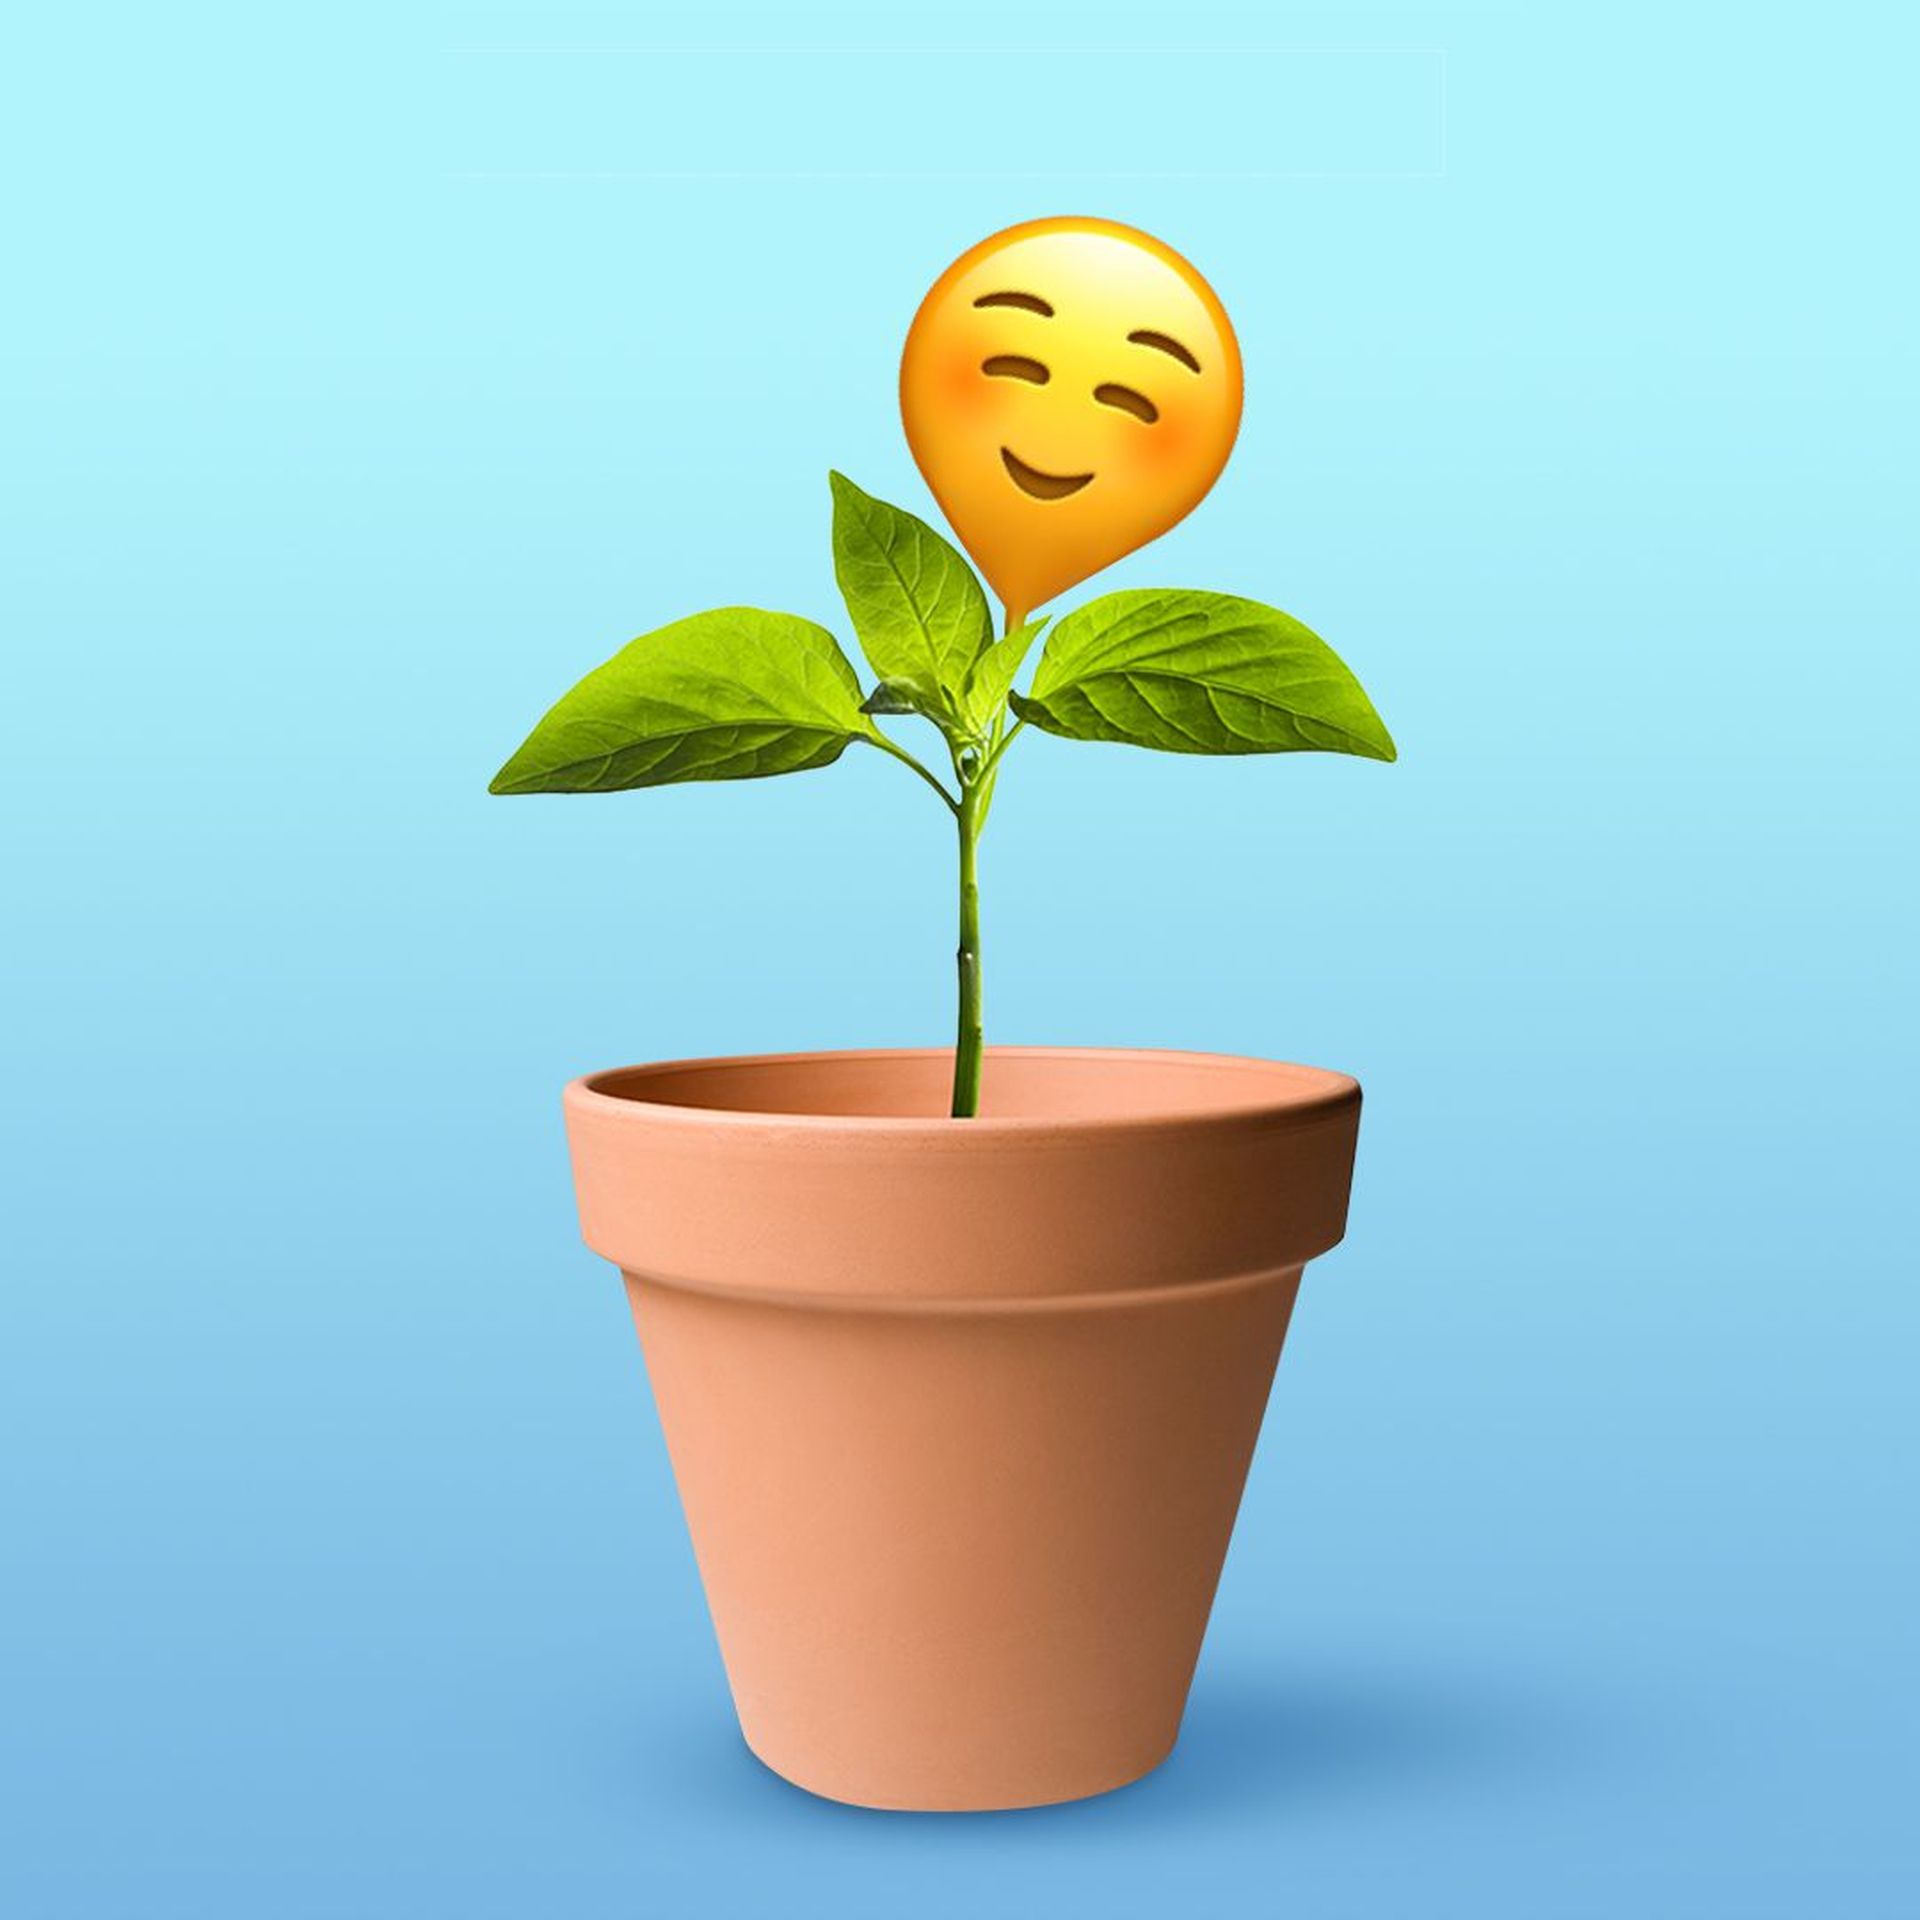 Illustration of a smiley face sprouting from a potted plant